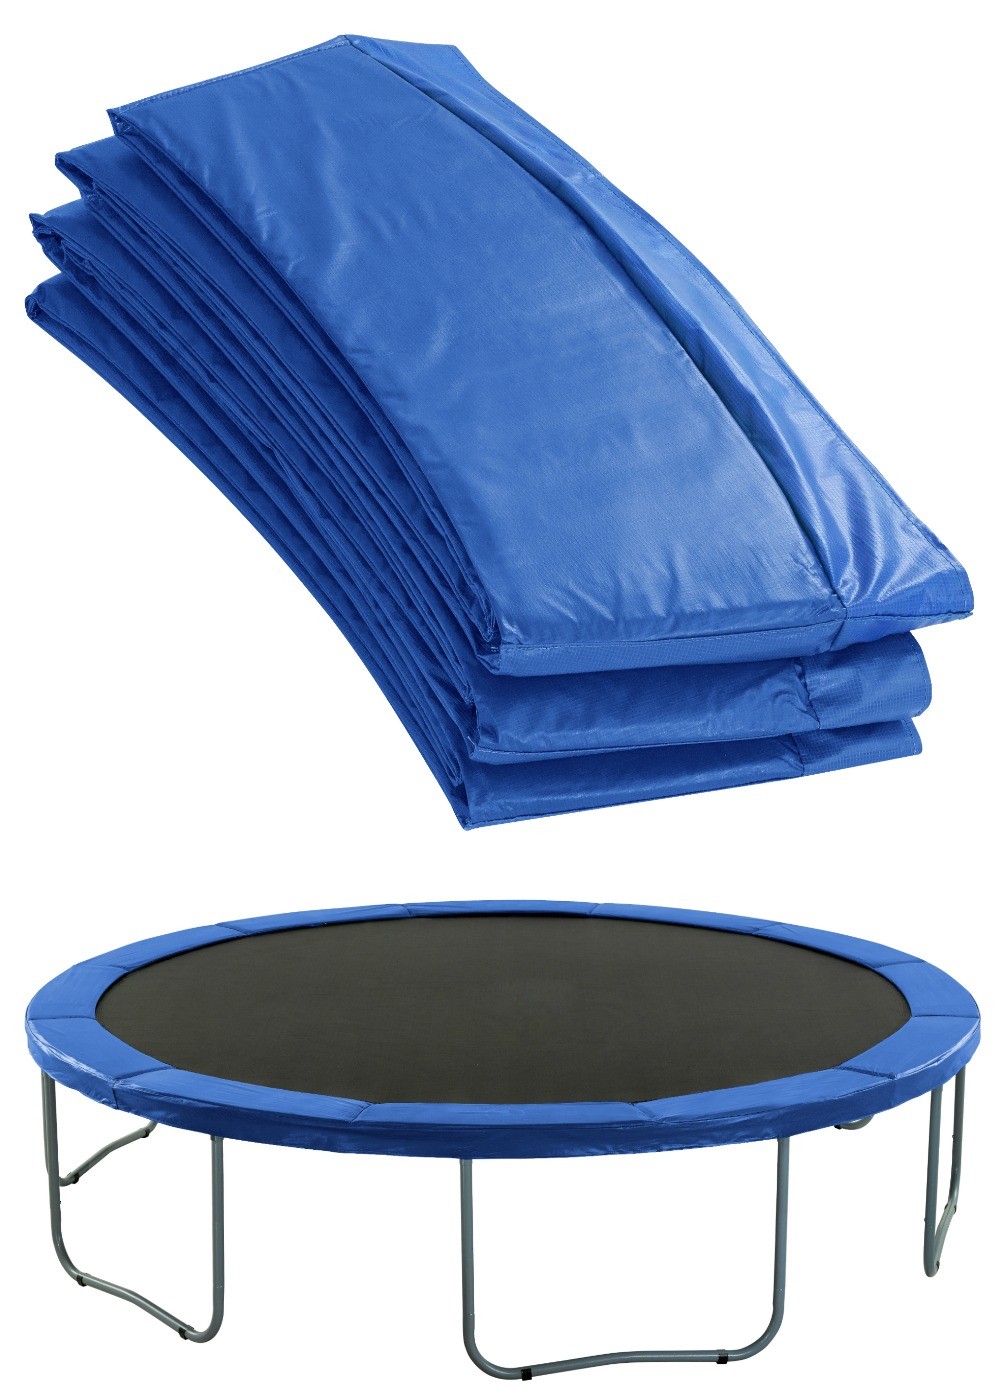 Premium Trampoline Replacement Safety Pad (Spring Cover) Fits for 12 FT. Round Frames - 3/4" Foam | Blue